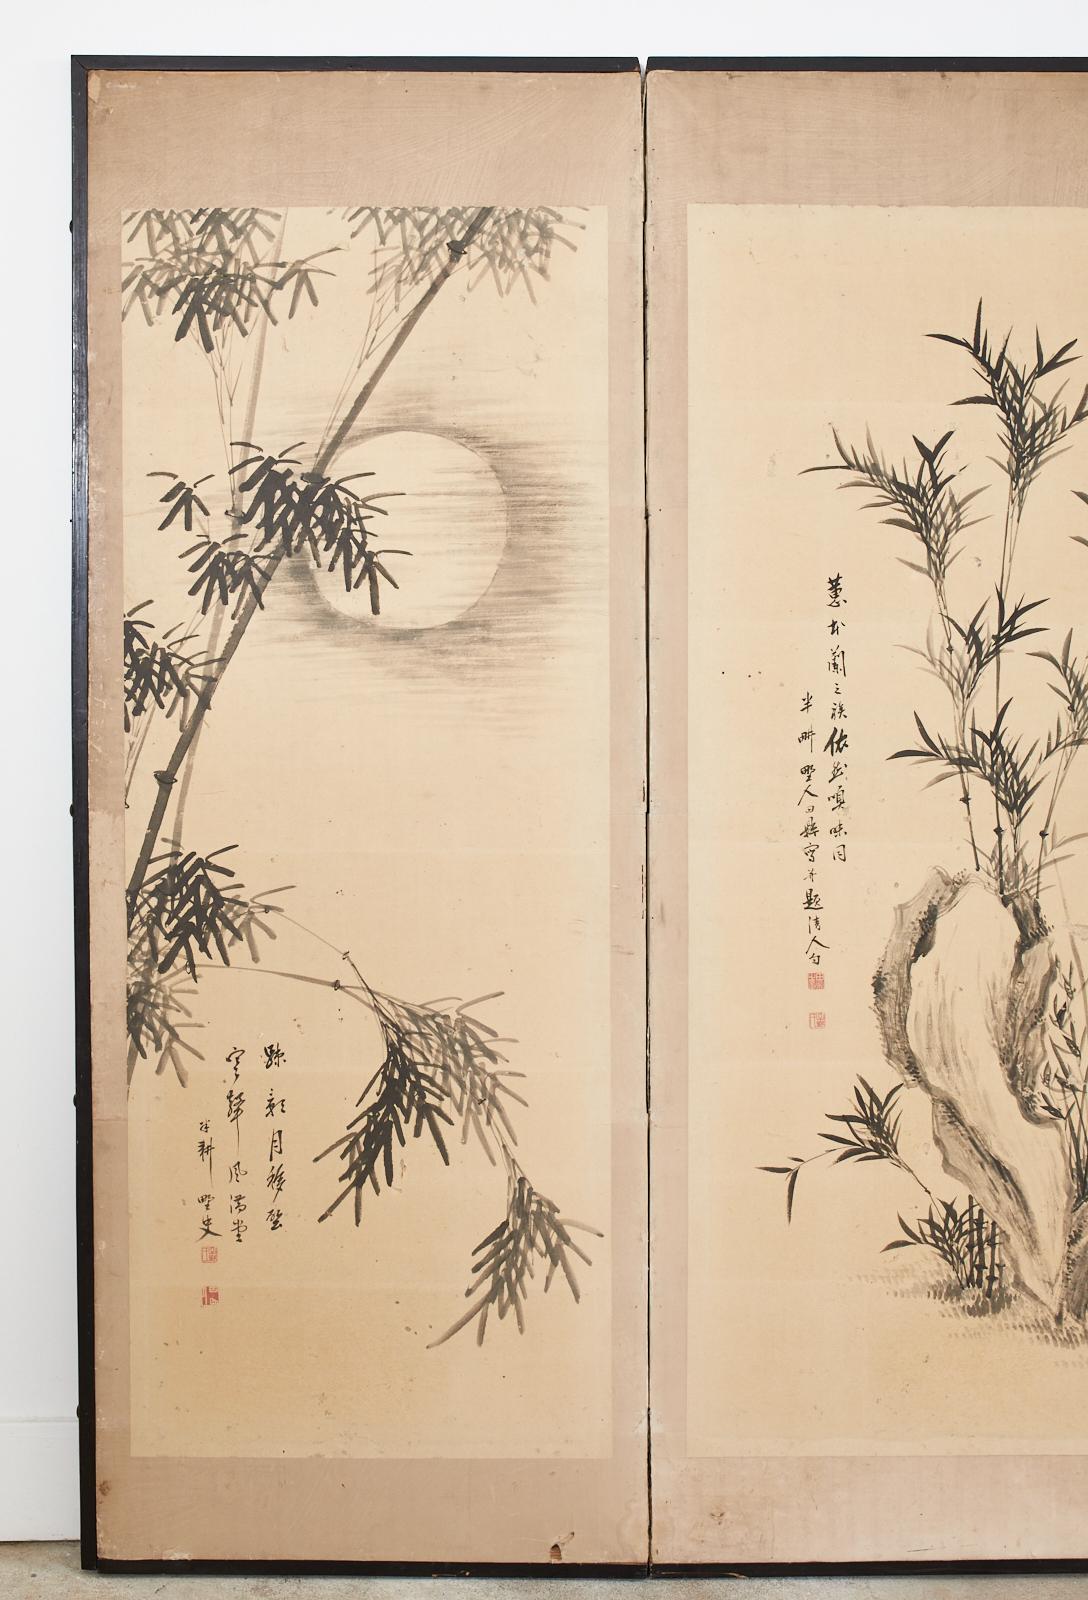 Fascinating Japanese six-panel folding byobu screen featuring six literati school painted works each signed with 2 seals. The left panel (moon) has a Chinese poetic couplet with 2 seals. The second panel has a 5 character Chinese poetic couplet with